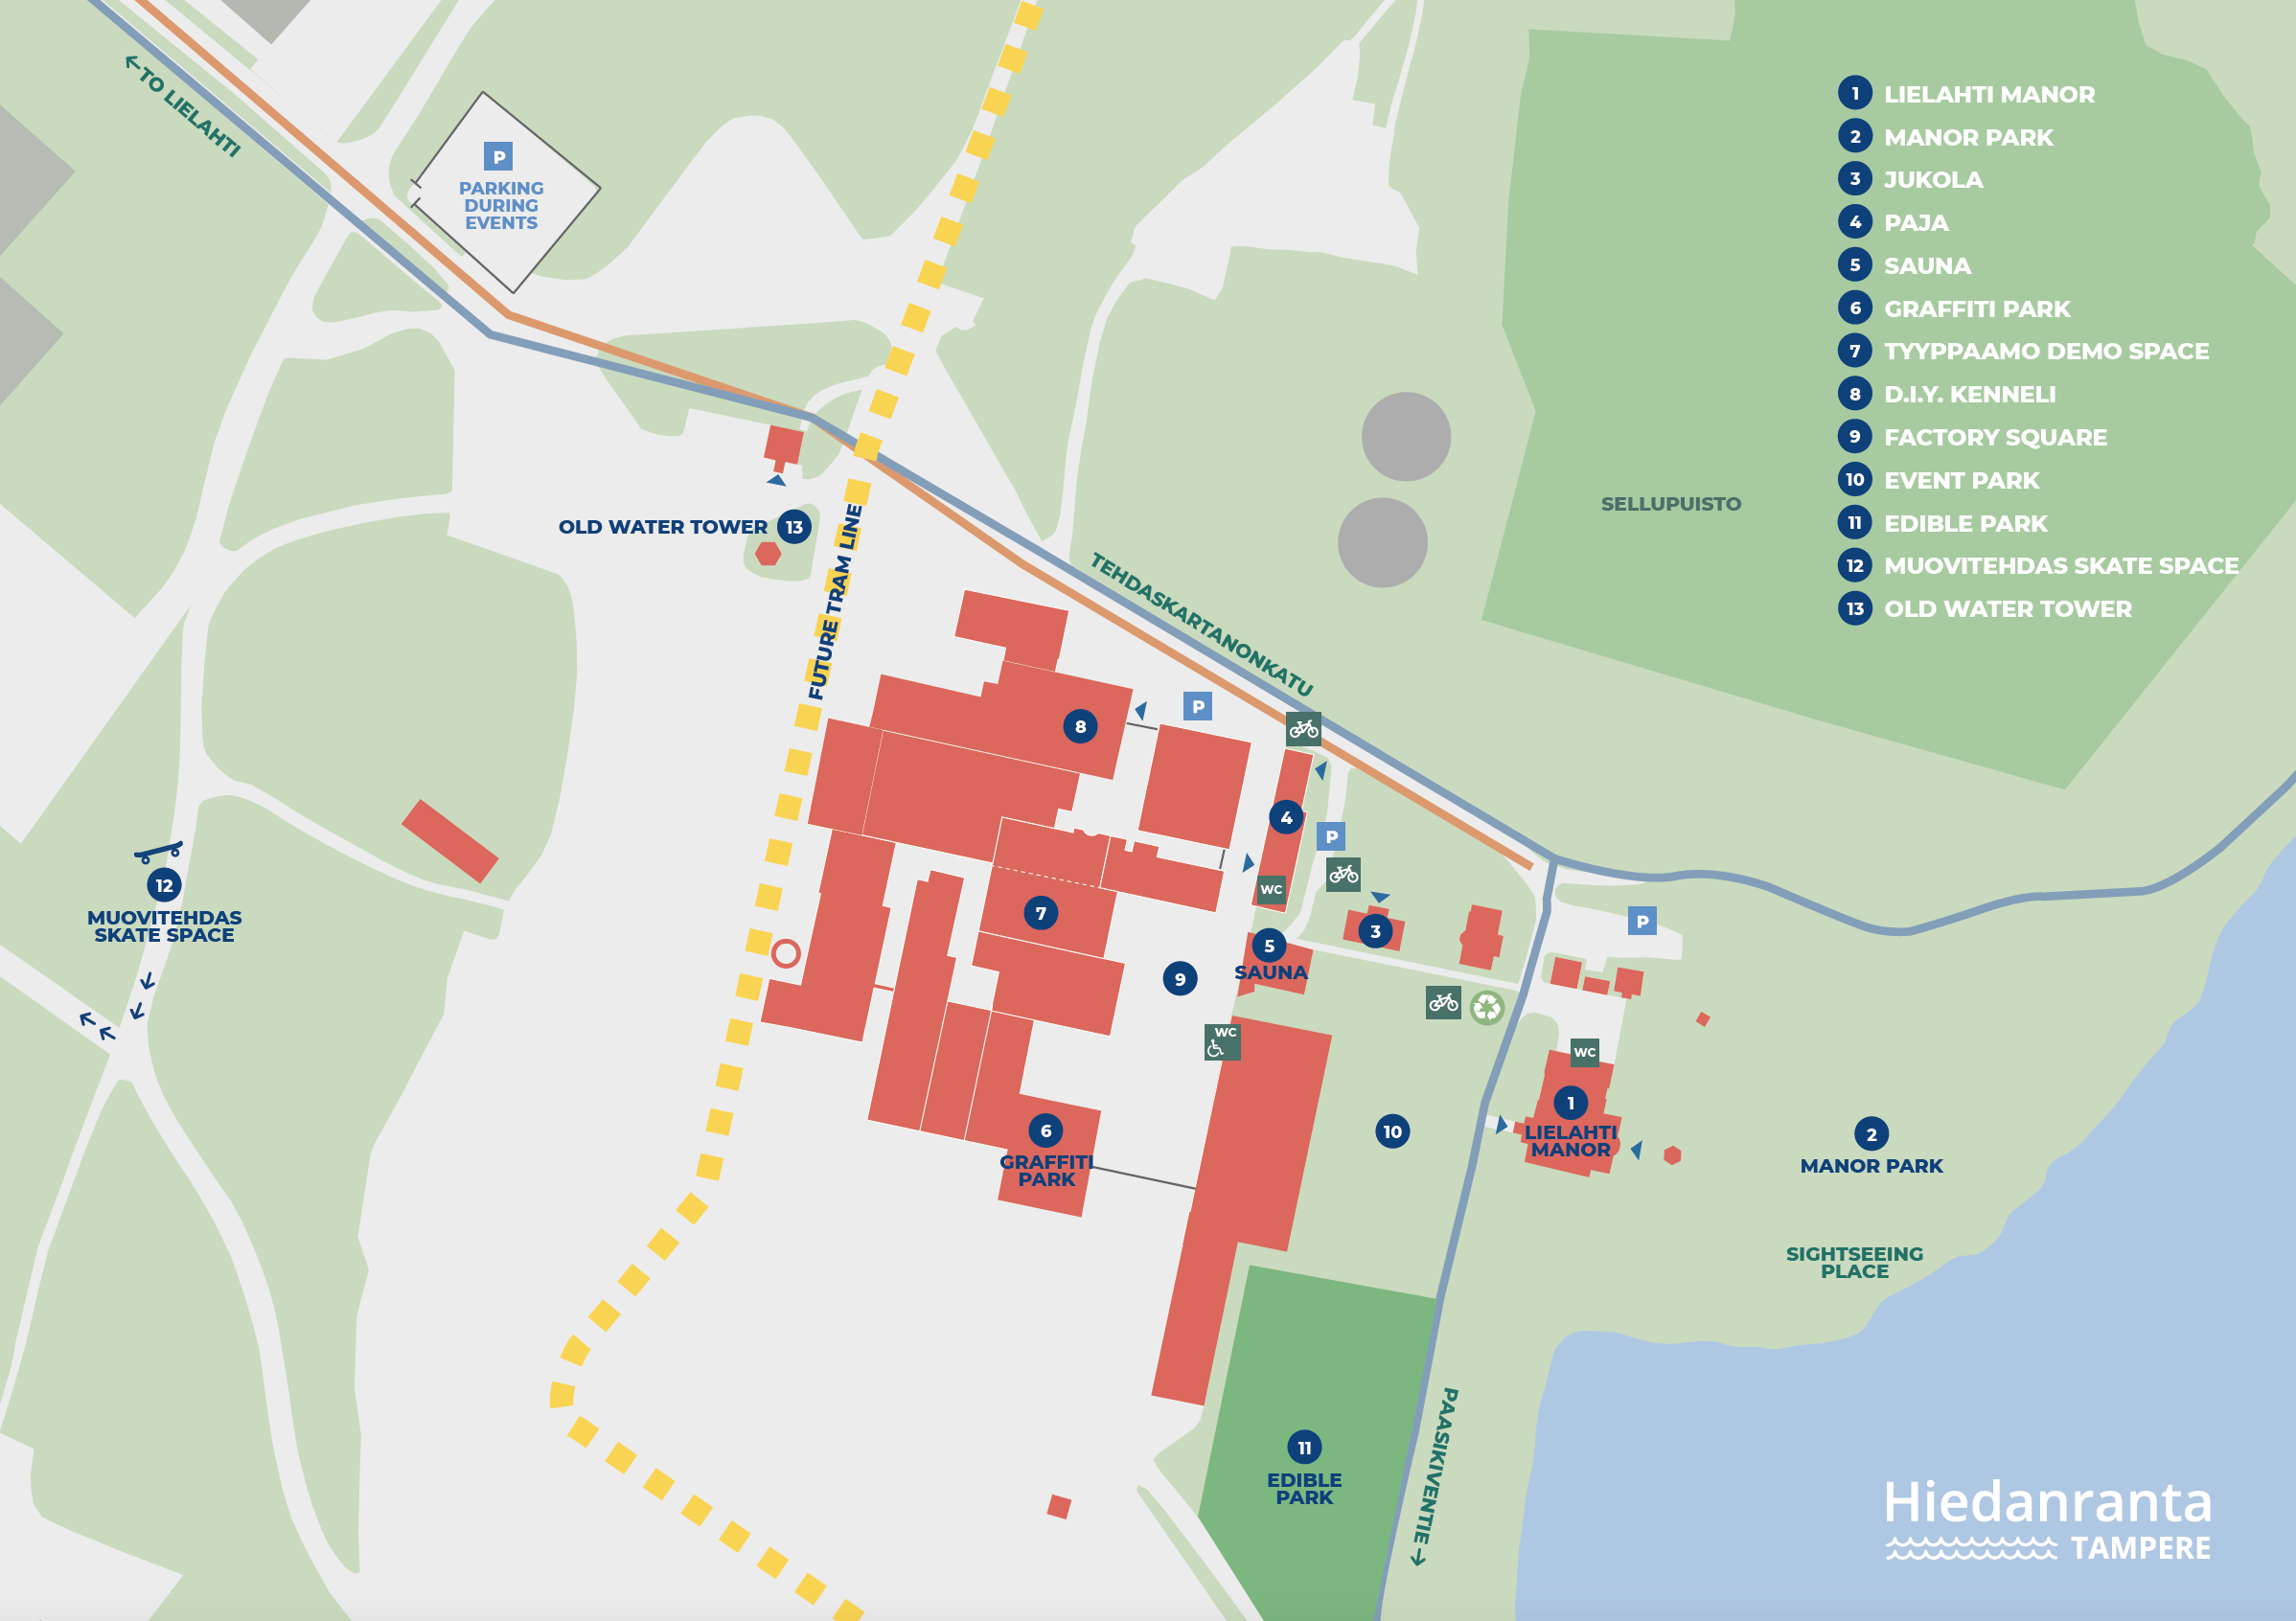 A map of Hiedanranta event locations